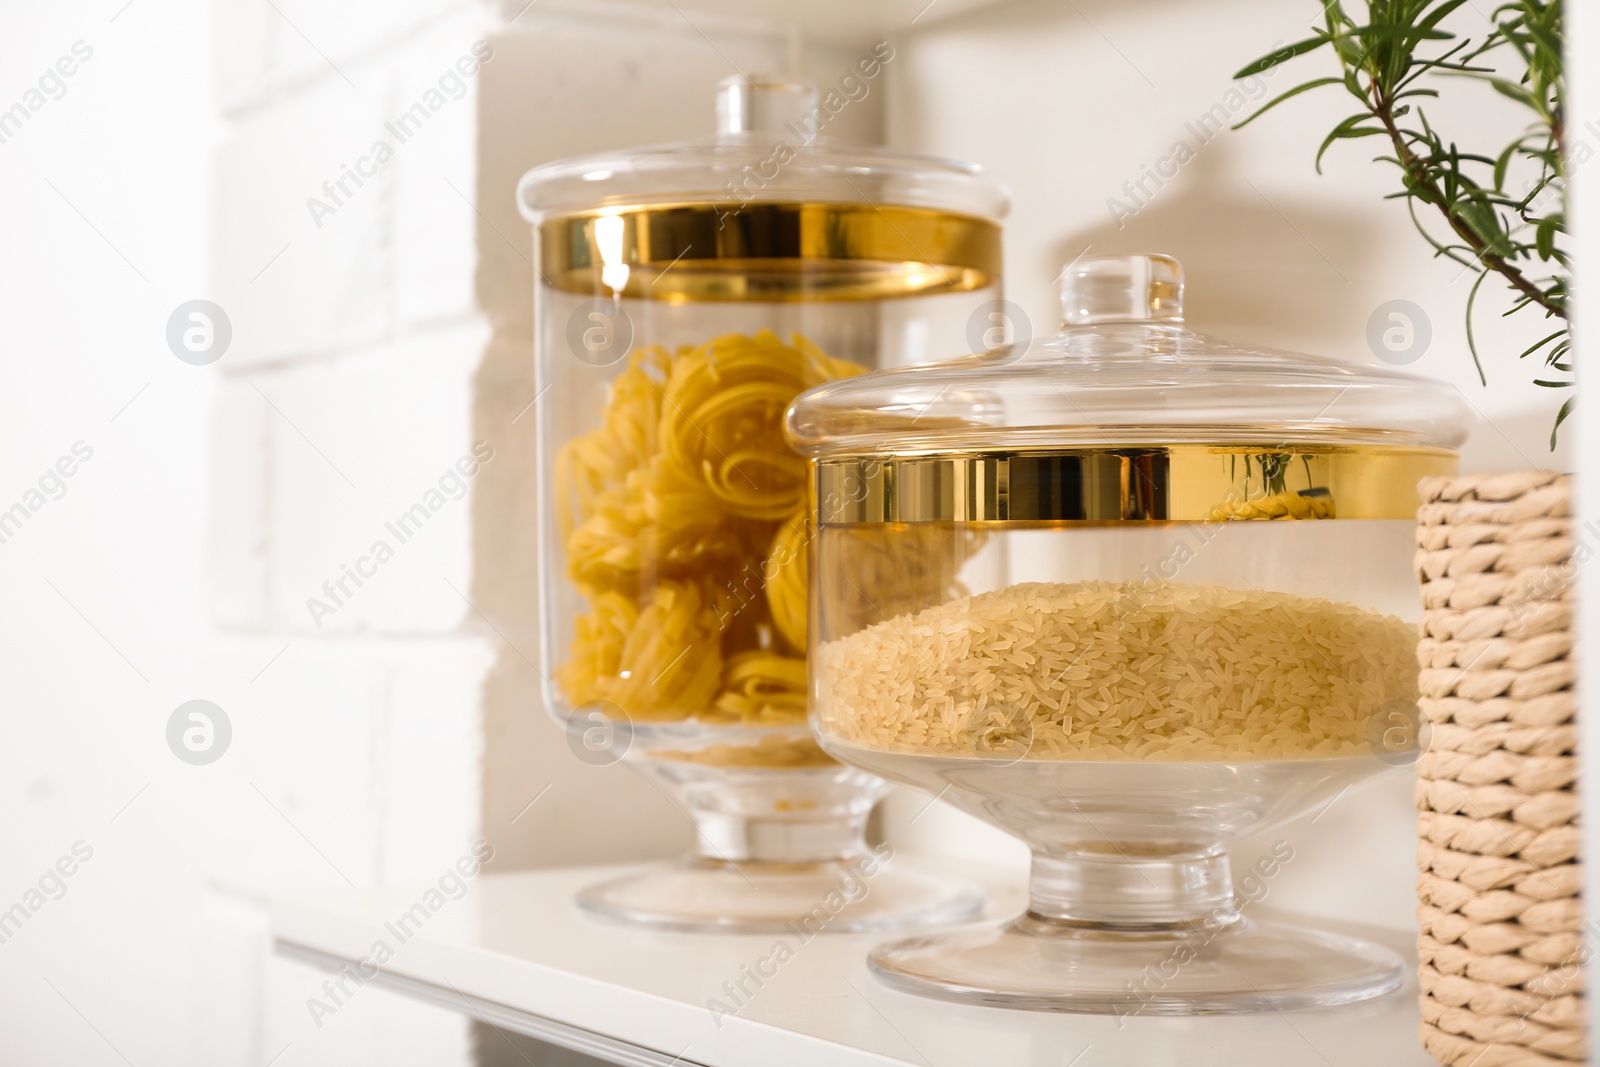 Photo of Products in modern kitchen glass containers on shelving unit